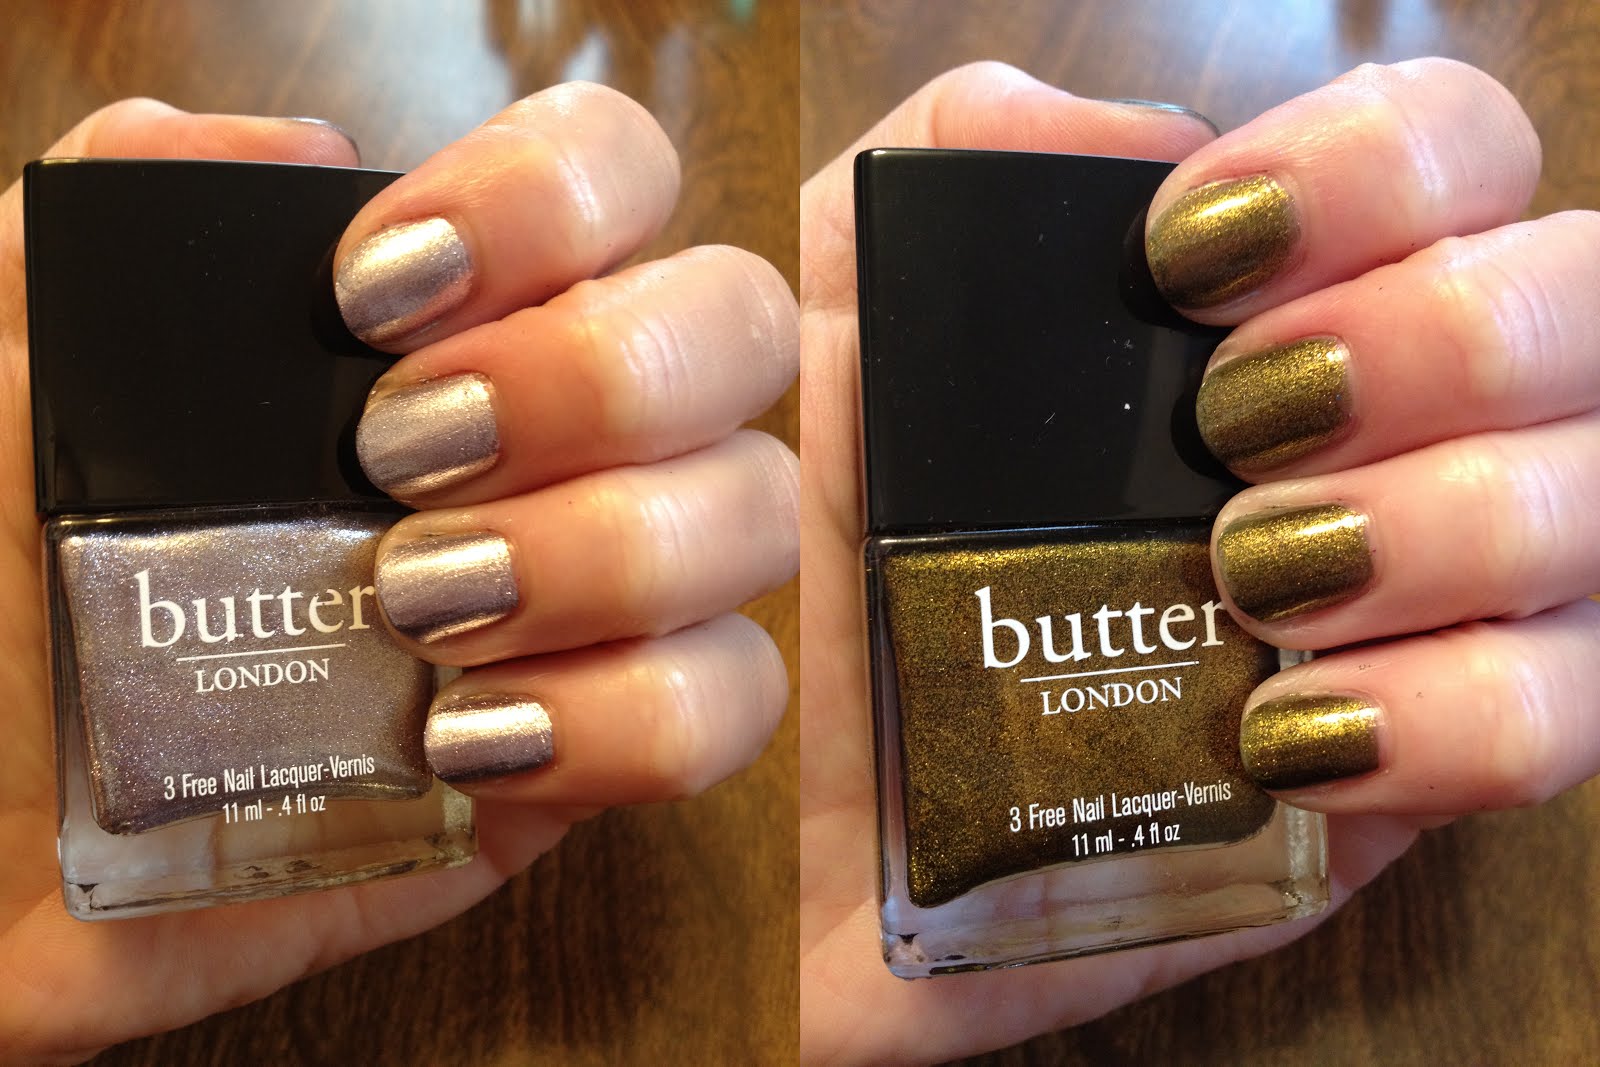 8. Butter London Nail Lacquer Color Swatch Book - wide 7